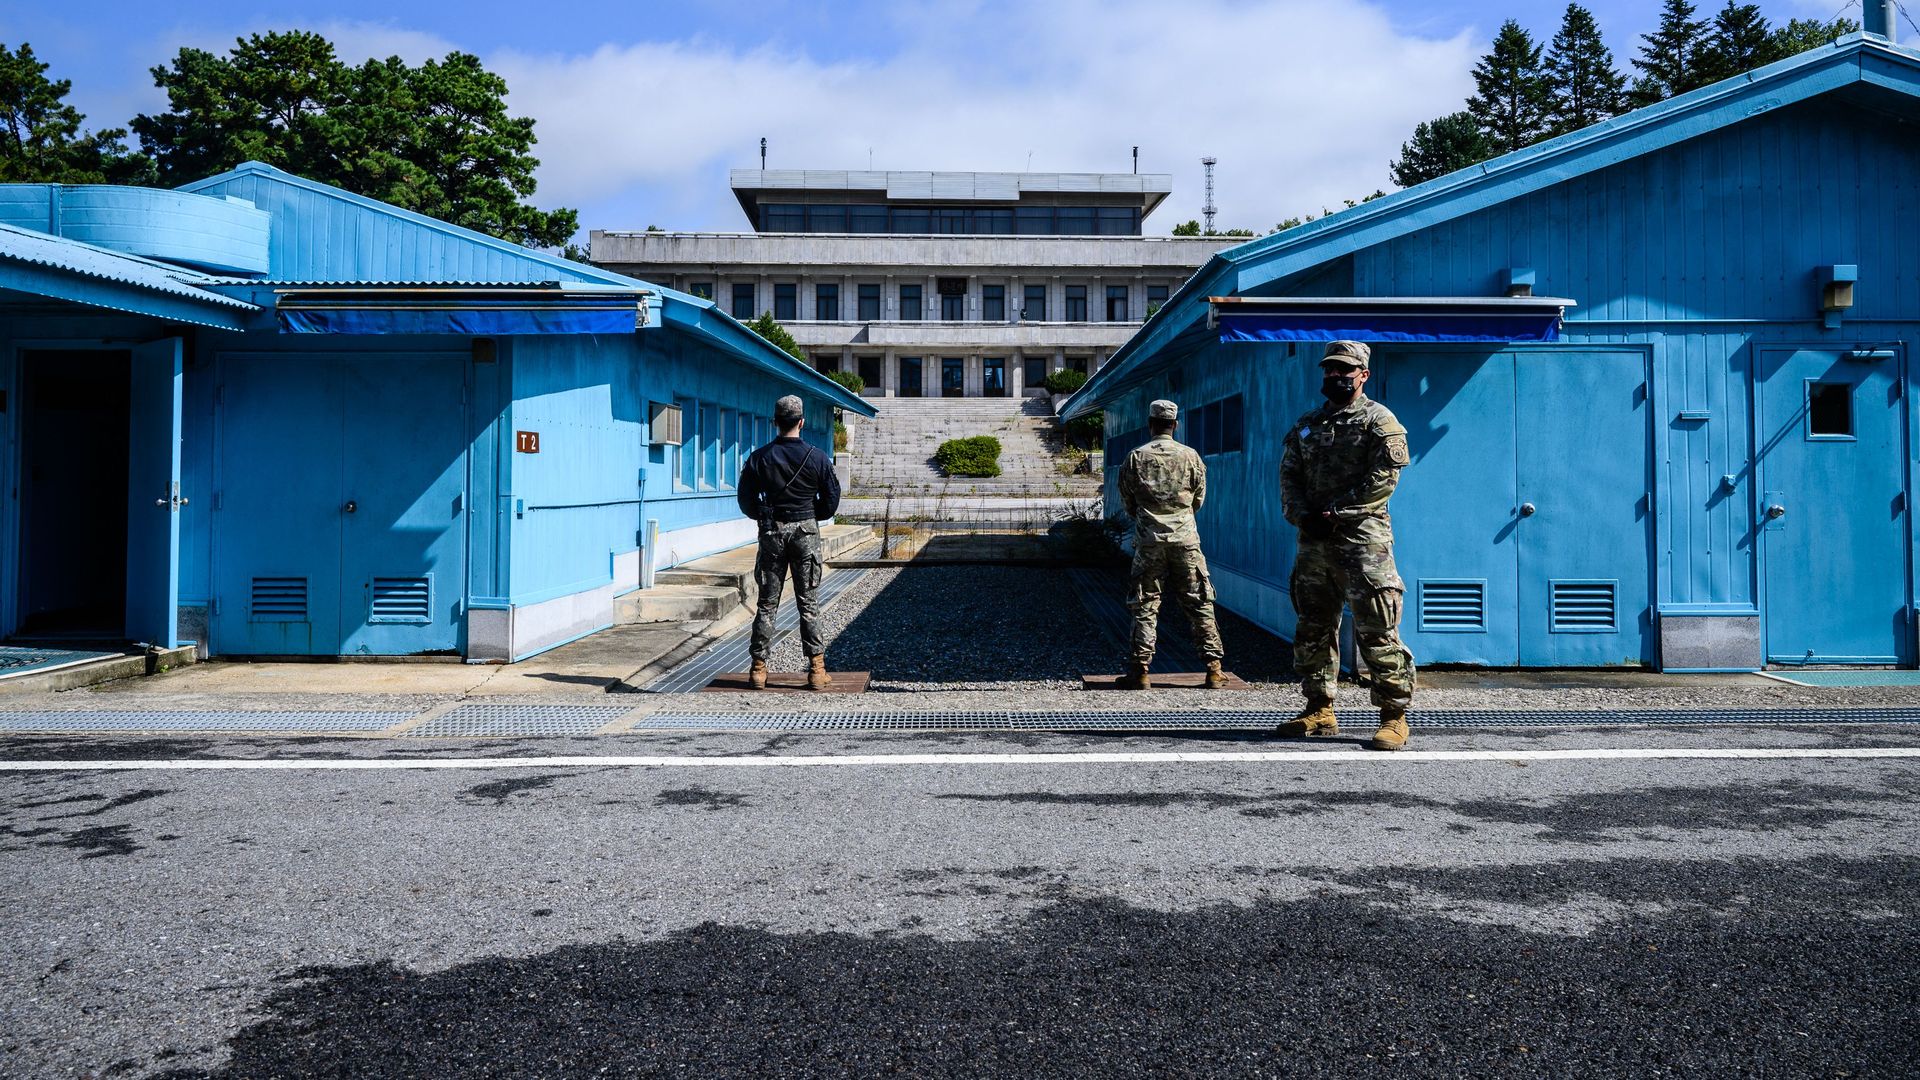 The military demarcation line separating North and South Korea, at the Joint Security Area (JSA) of the Demilitarized Zone (DMZ) in the truce village of Panmunjom on October 4, 2022.